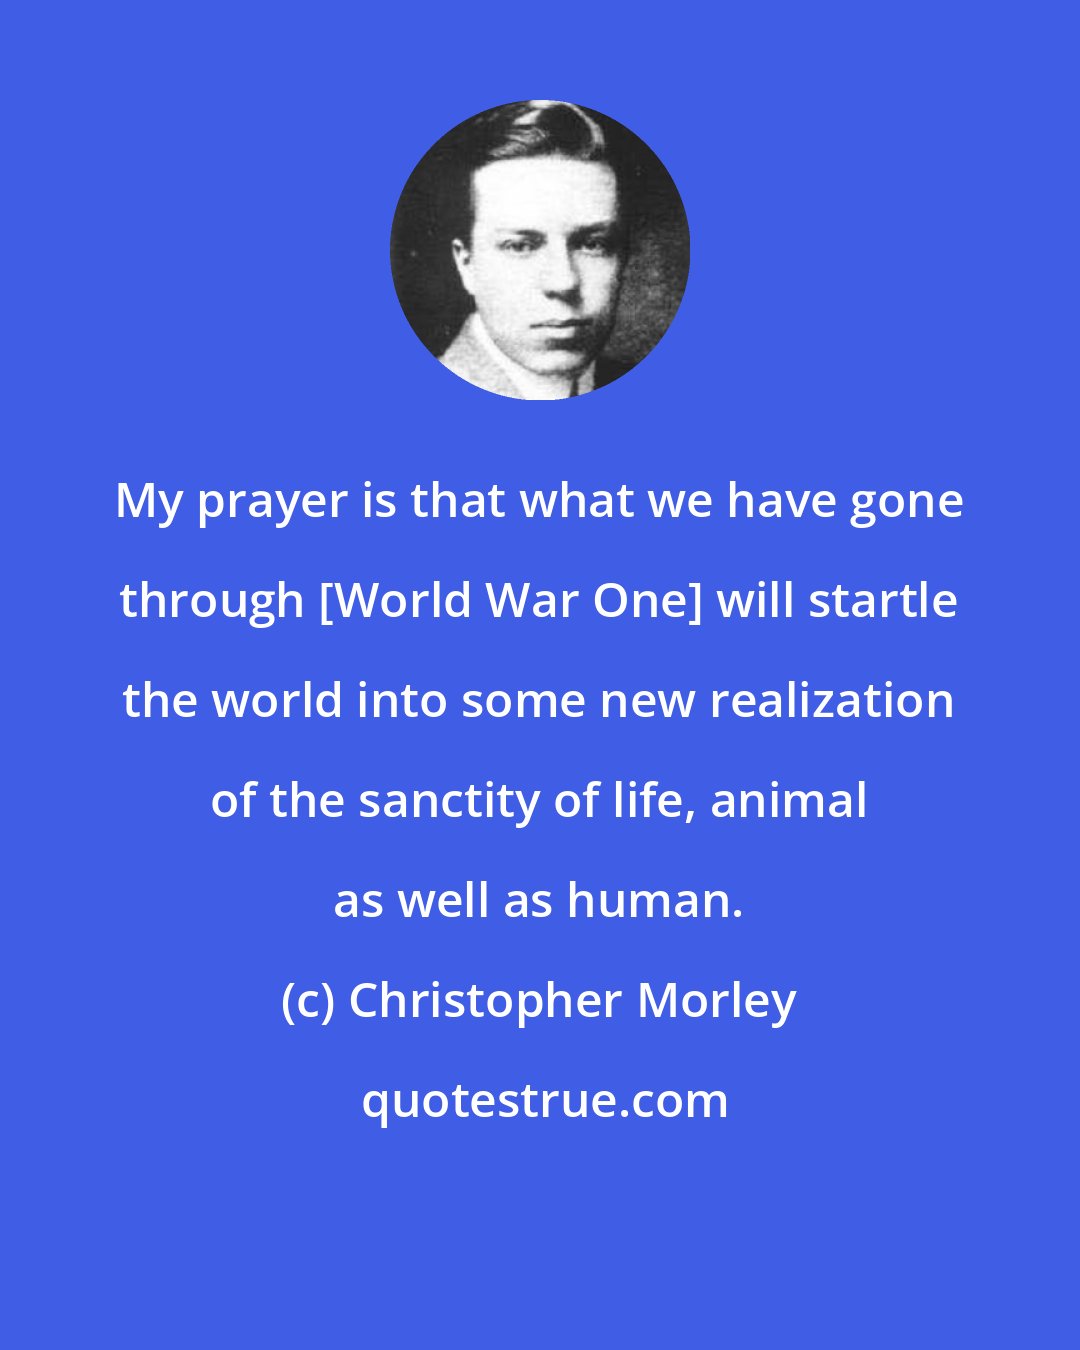 Christopher Morley: My prayer is that what we have gone through [World War One] will startle the world into some new realization of the sanctity of life, animal as well as human.